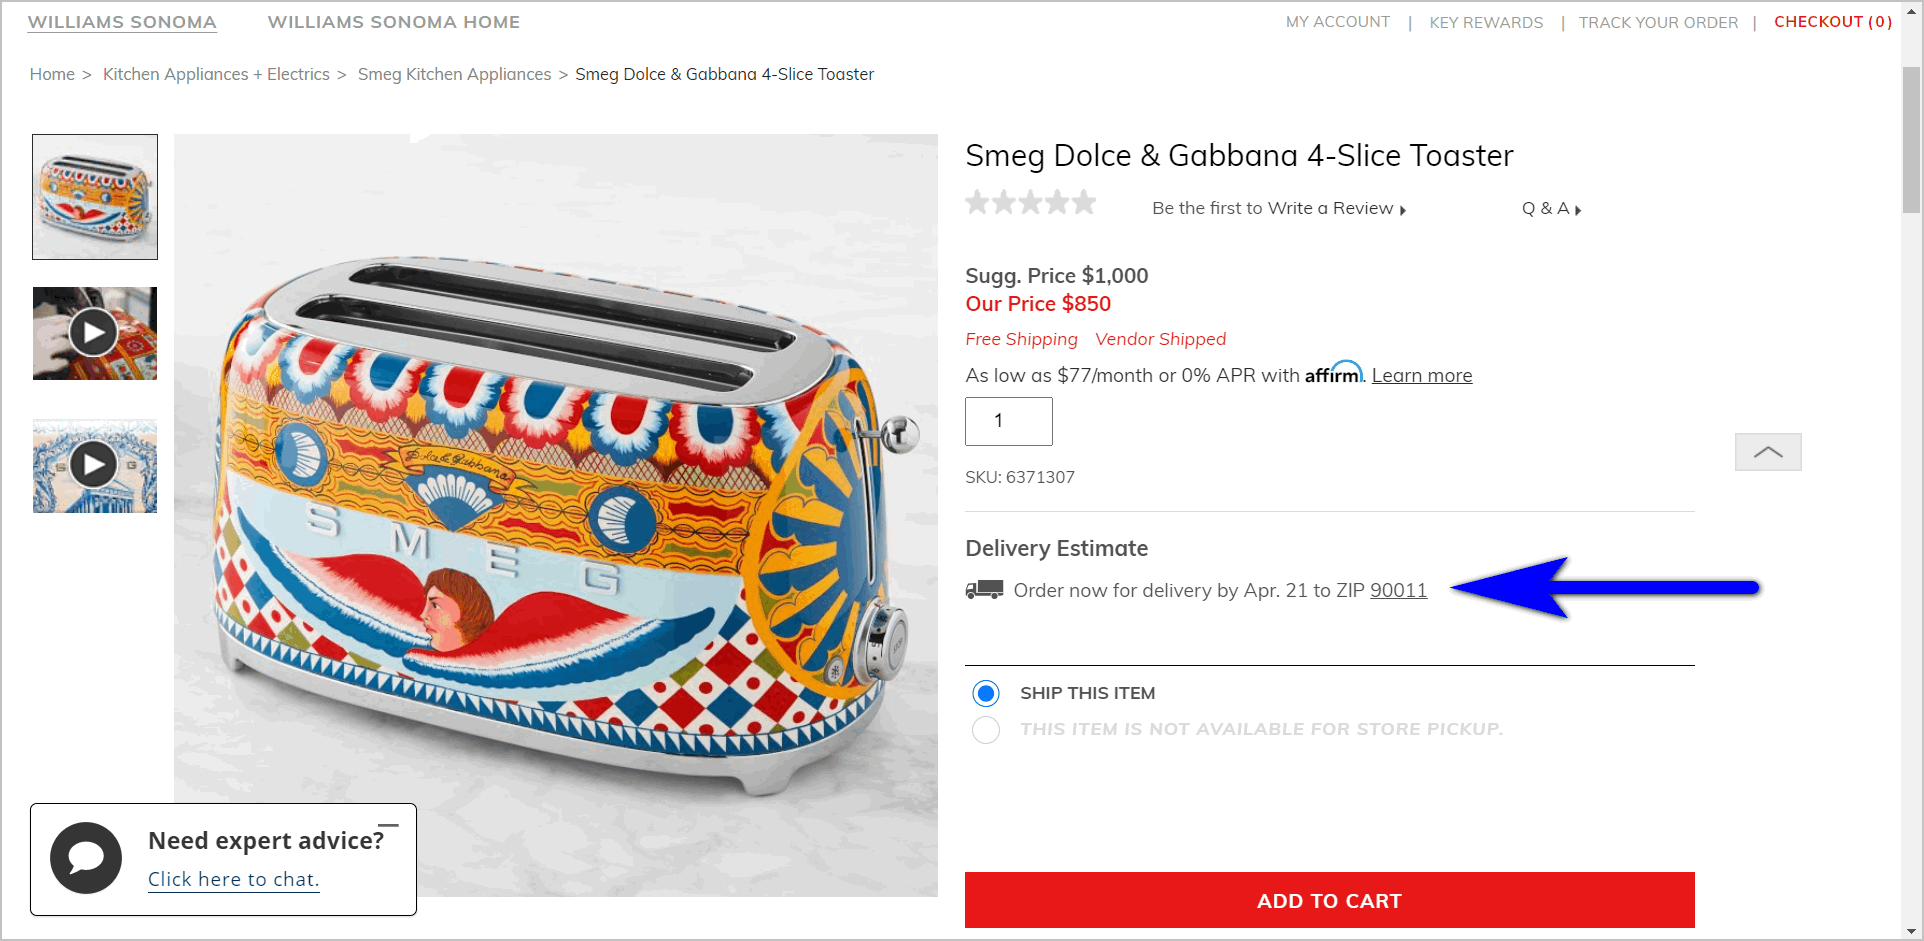 date-sensitive delivery example - williams-sonoma.com's product detail page has a delivery estimate in the action block. it tells shoppers the date the product can be delivered by if they 